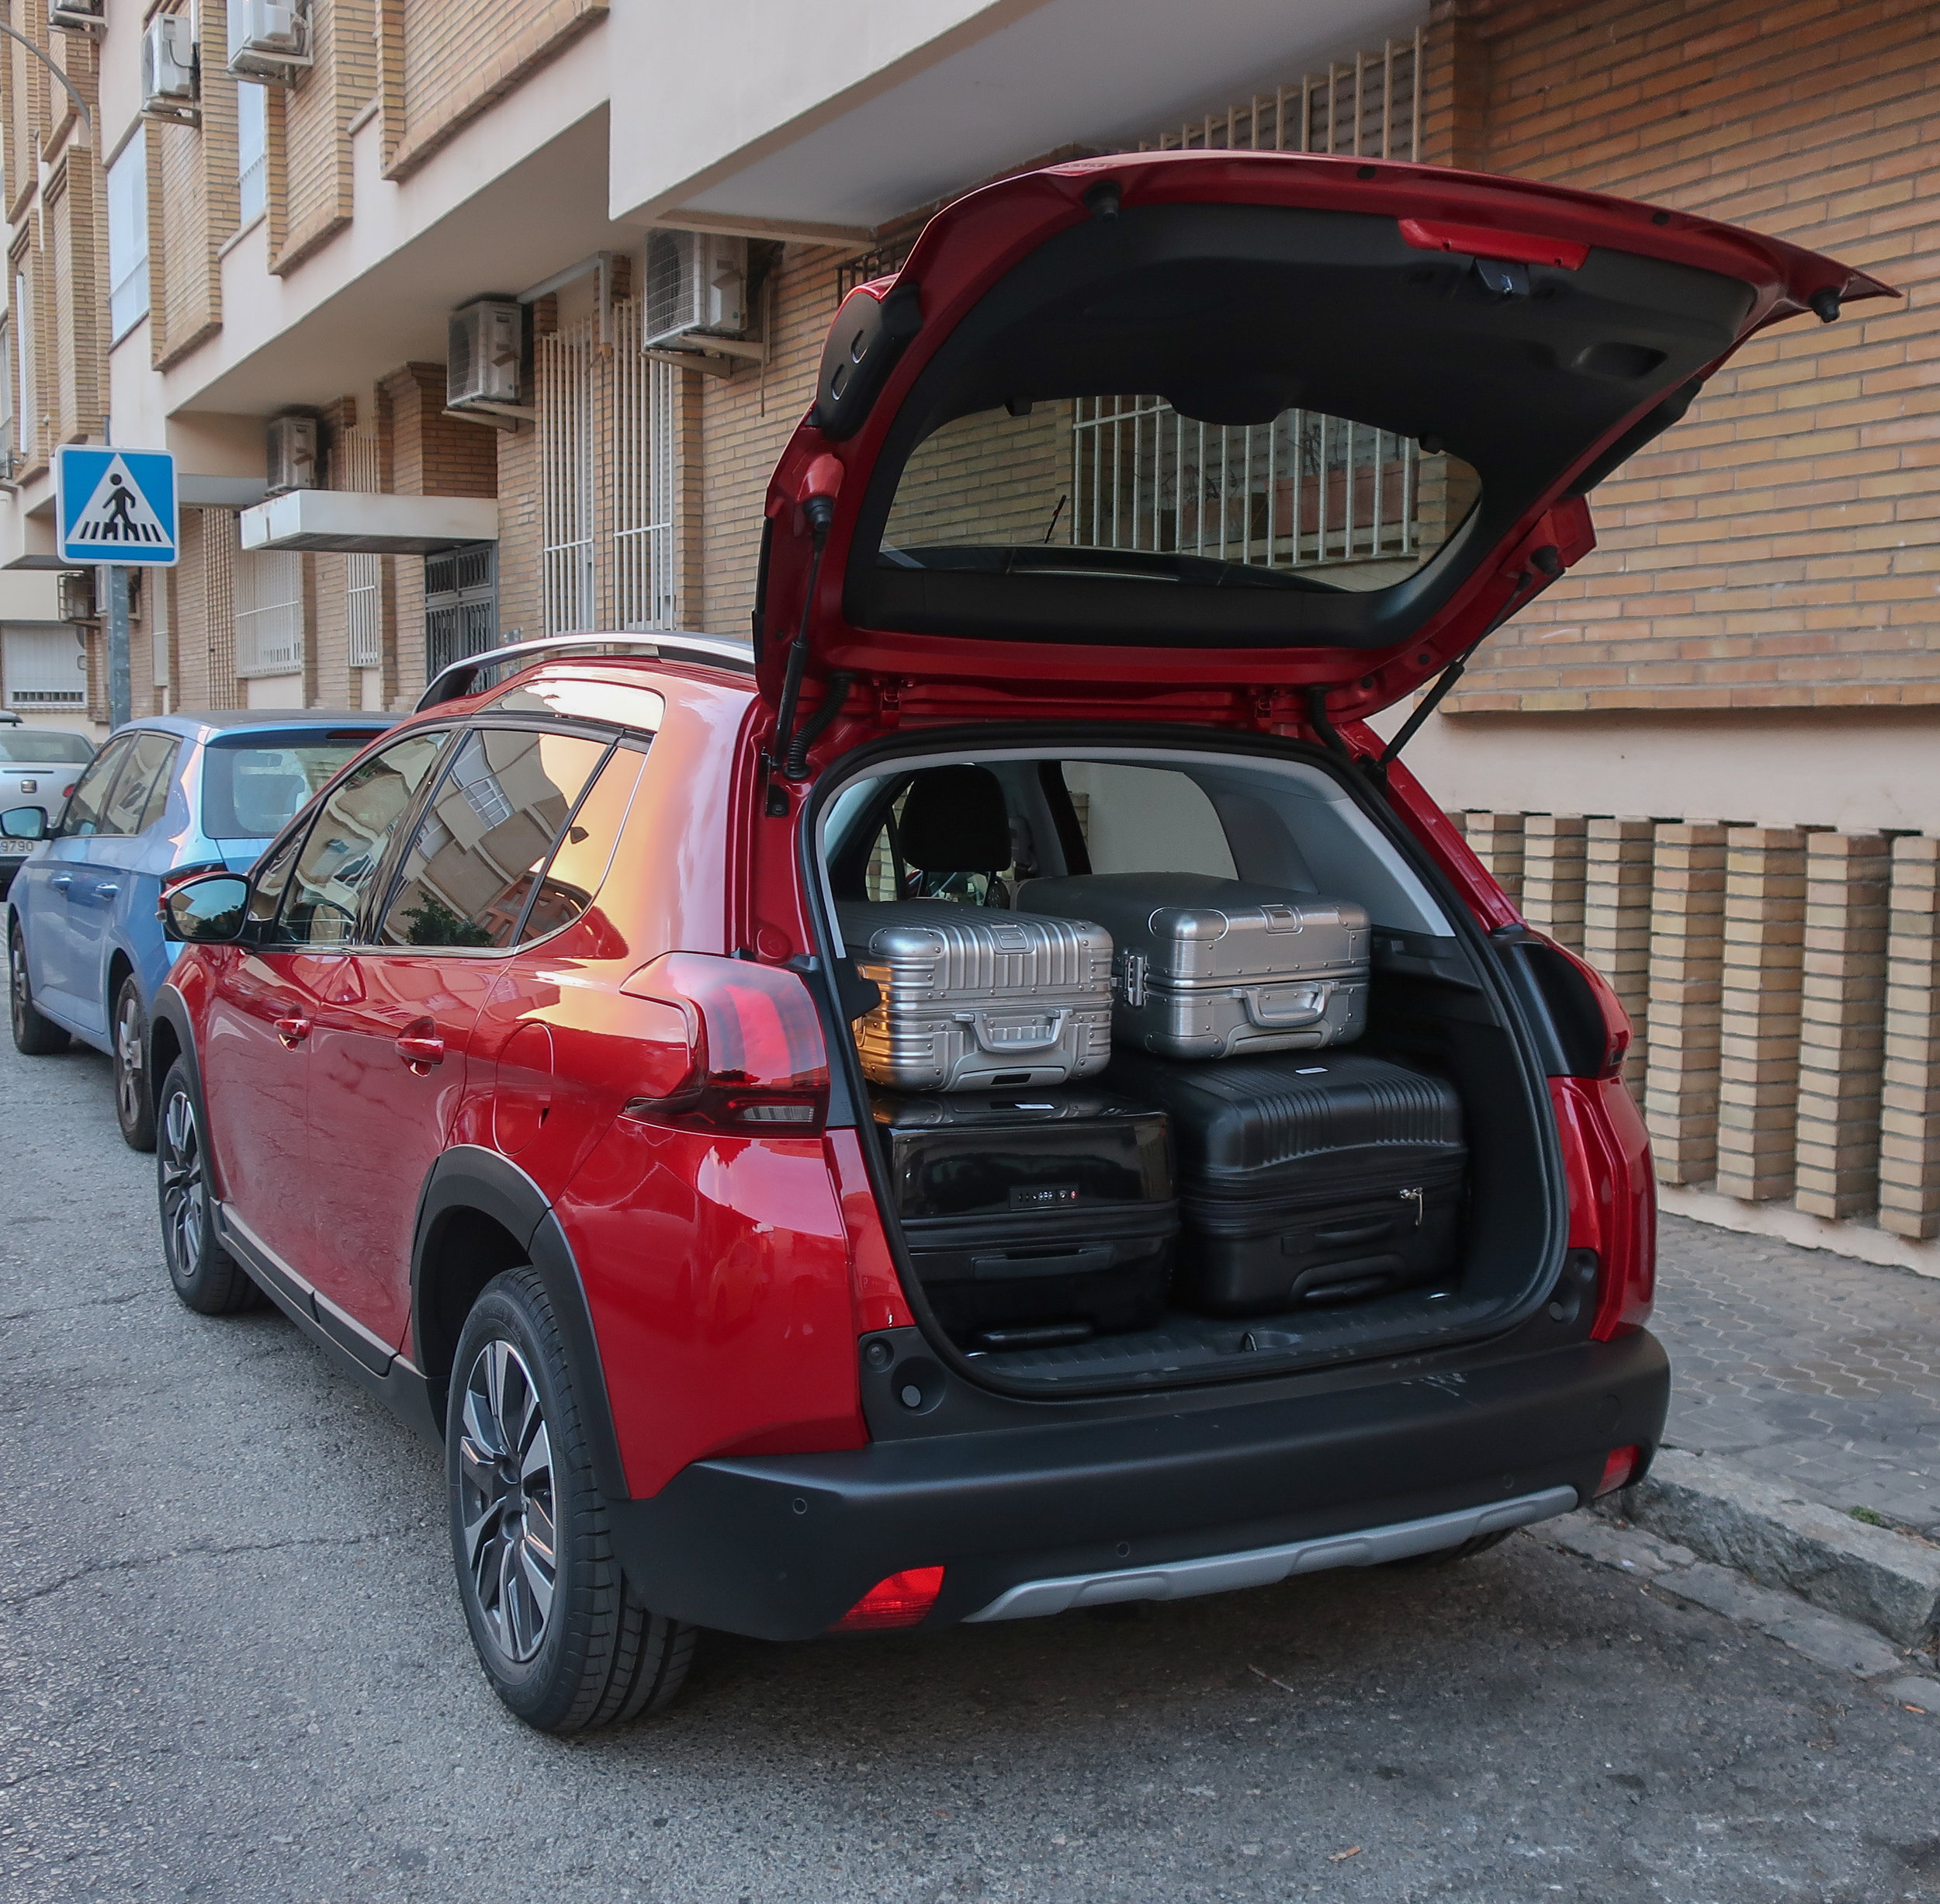  Packed the Peugeot 2008 with two large suitcases and two small suitcases. We folded the backseats down to make more room for our backpacks, photography gear, and extras. 